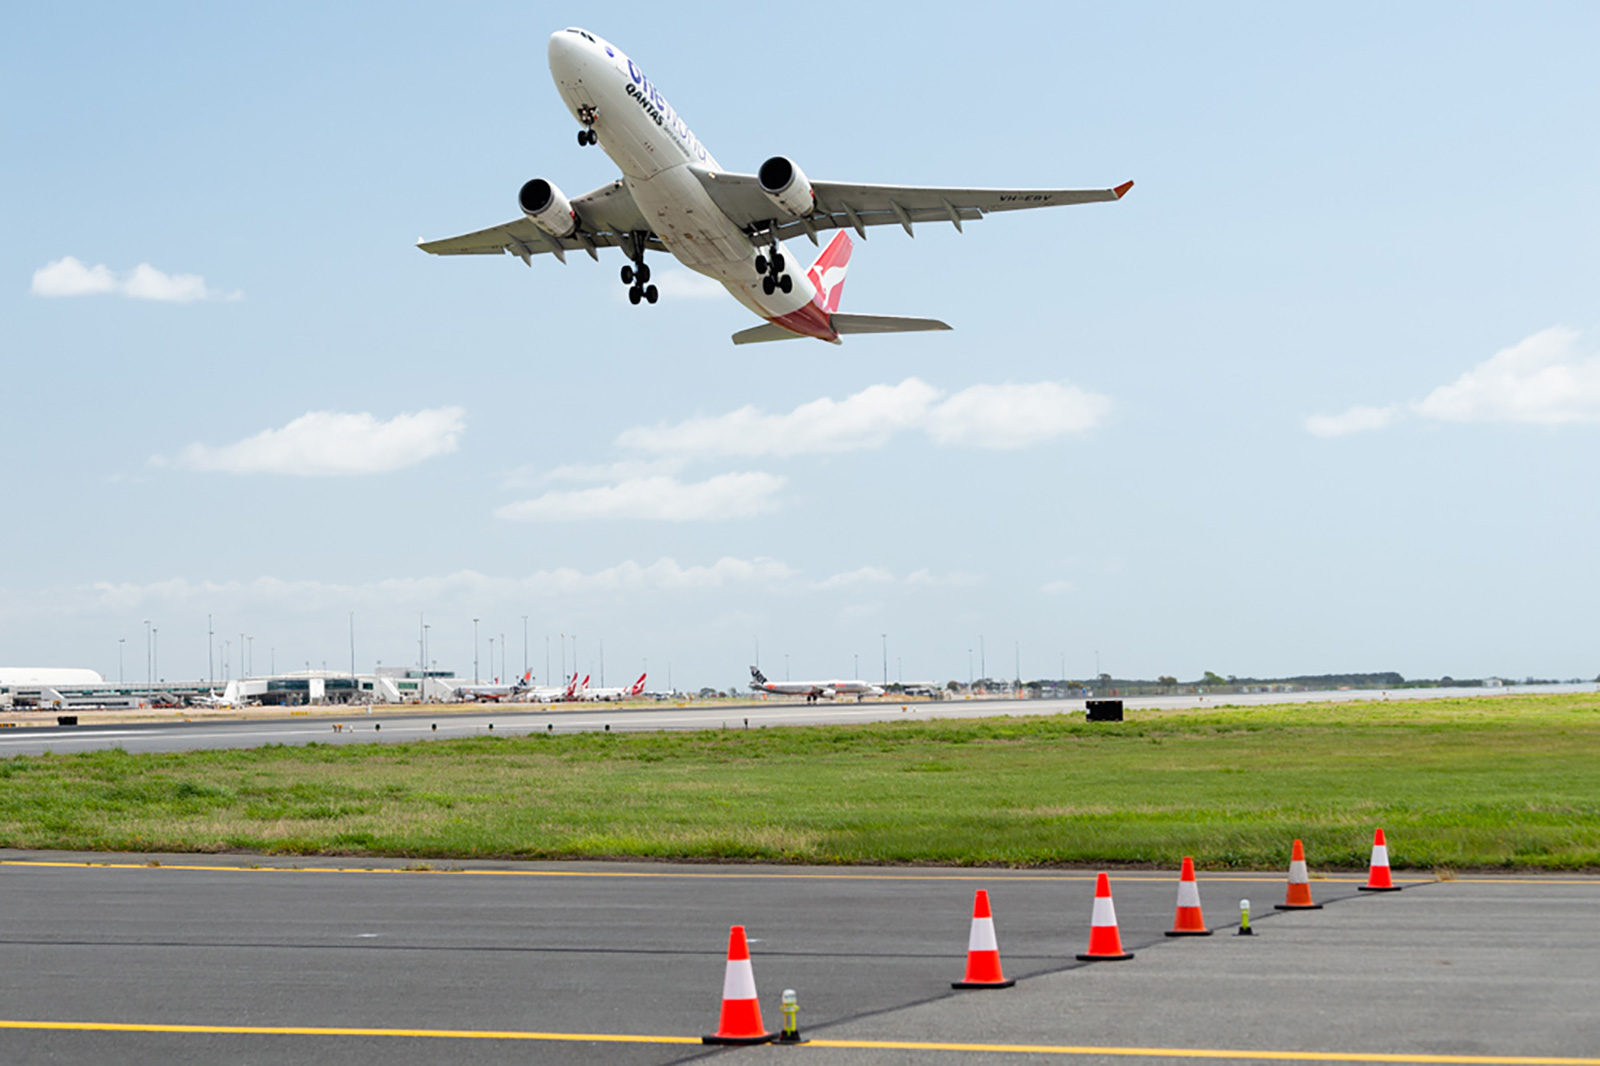 Stop Bars are located 0.3 metres before each runway holding point